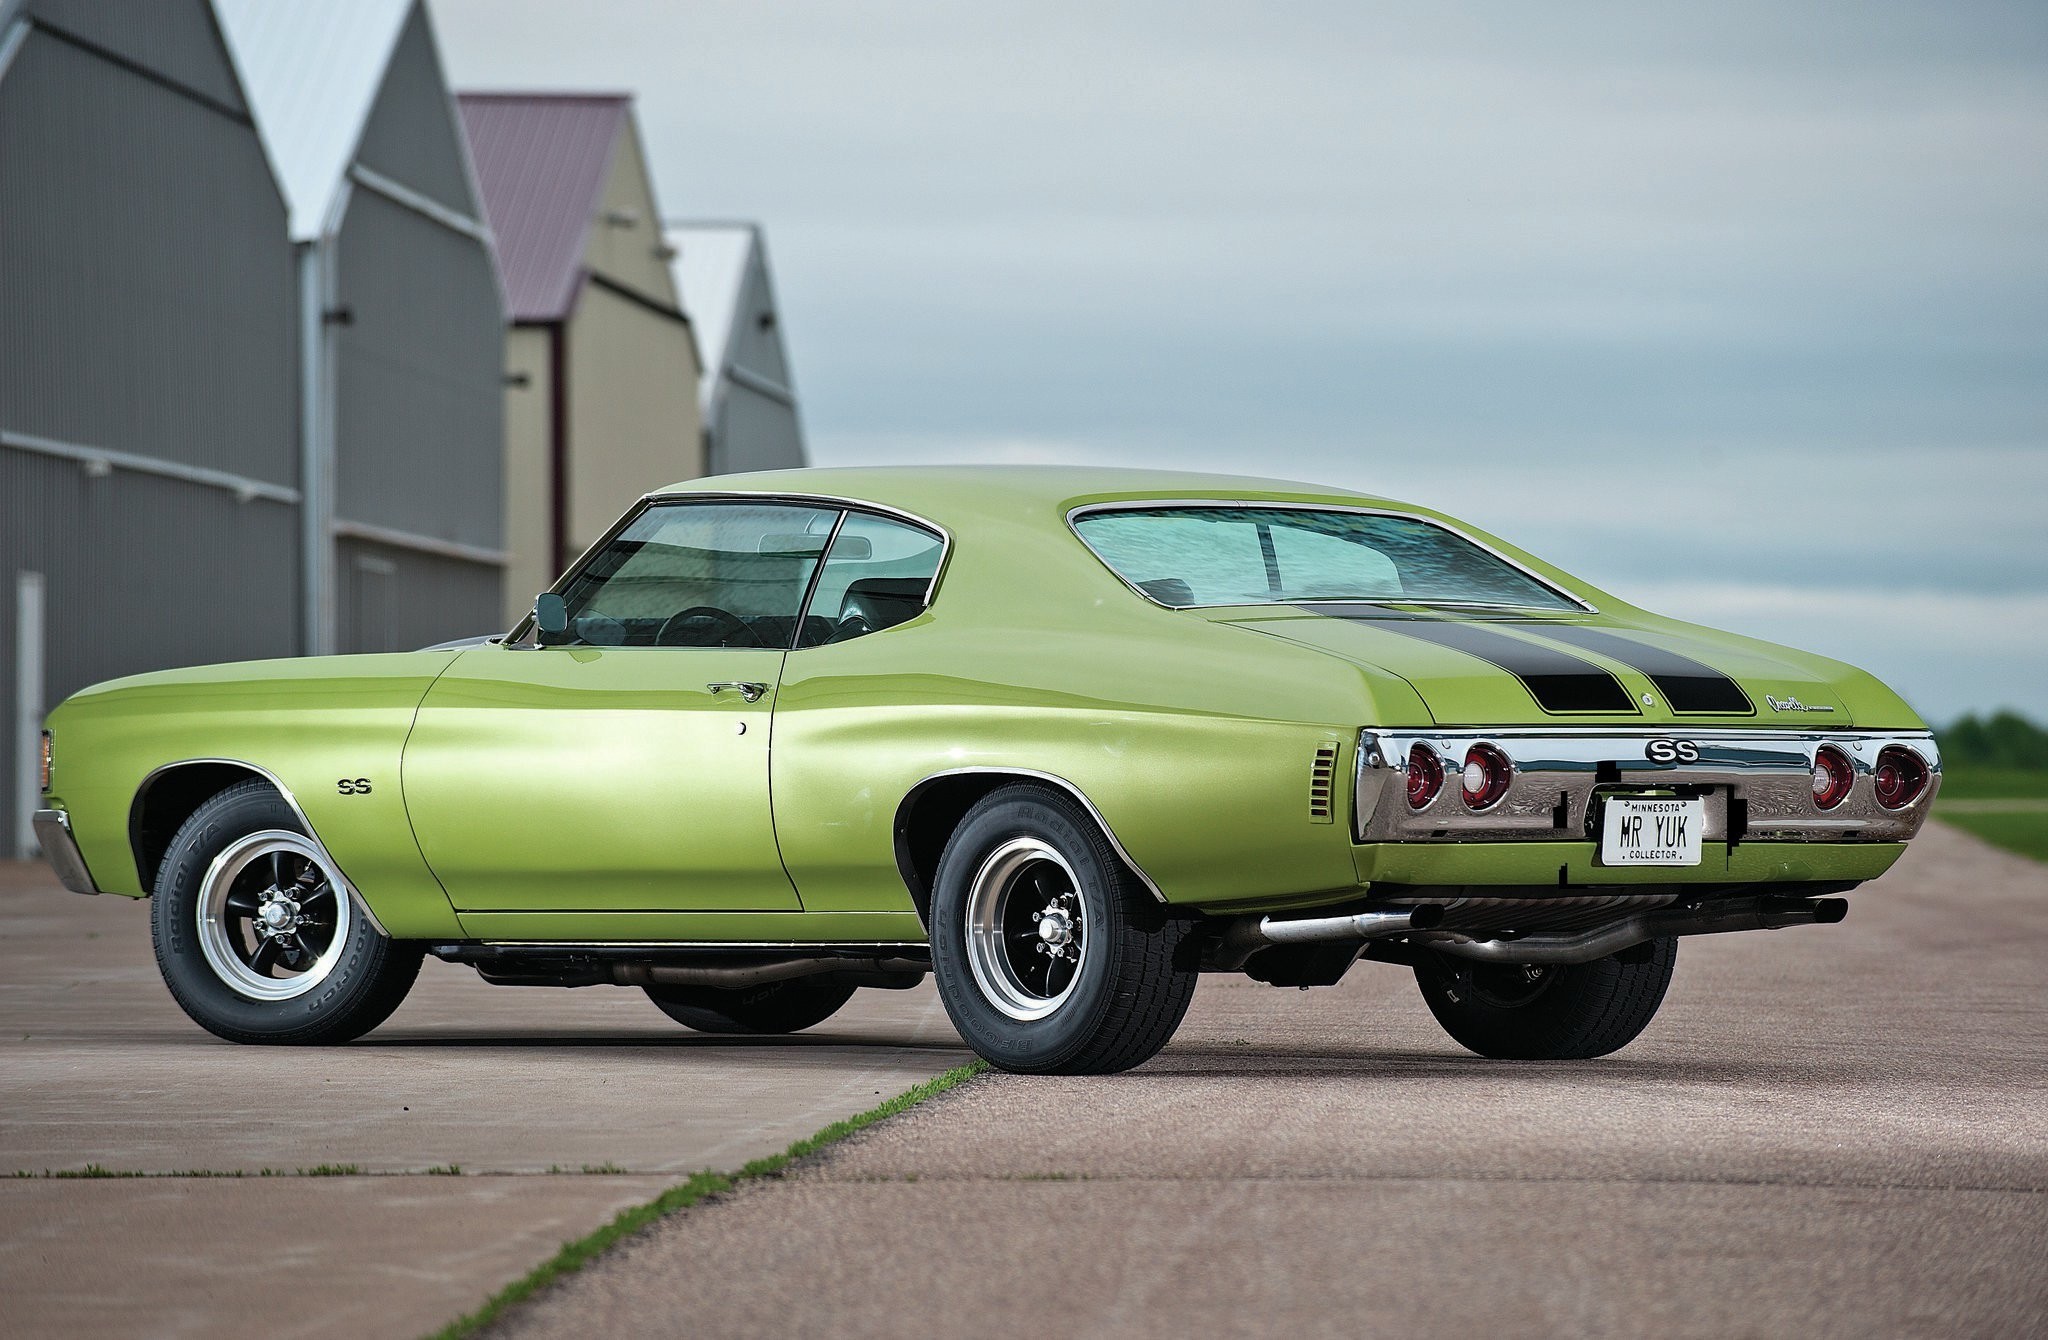 Windows Backgrounds auto, chevrolet, cars, green, 1972, chevelle